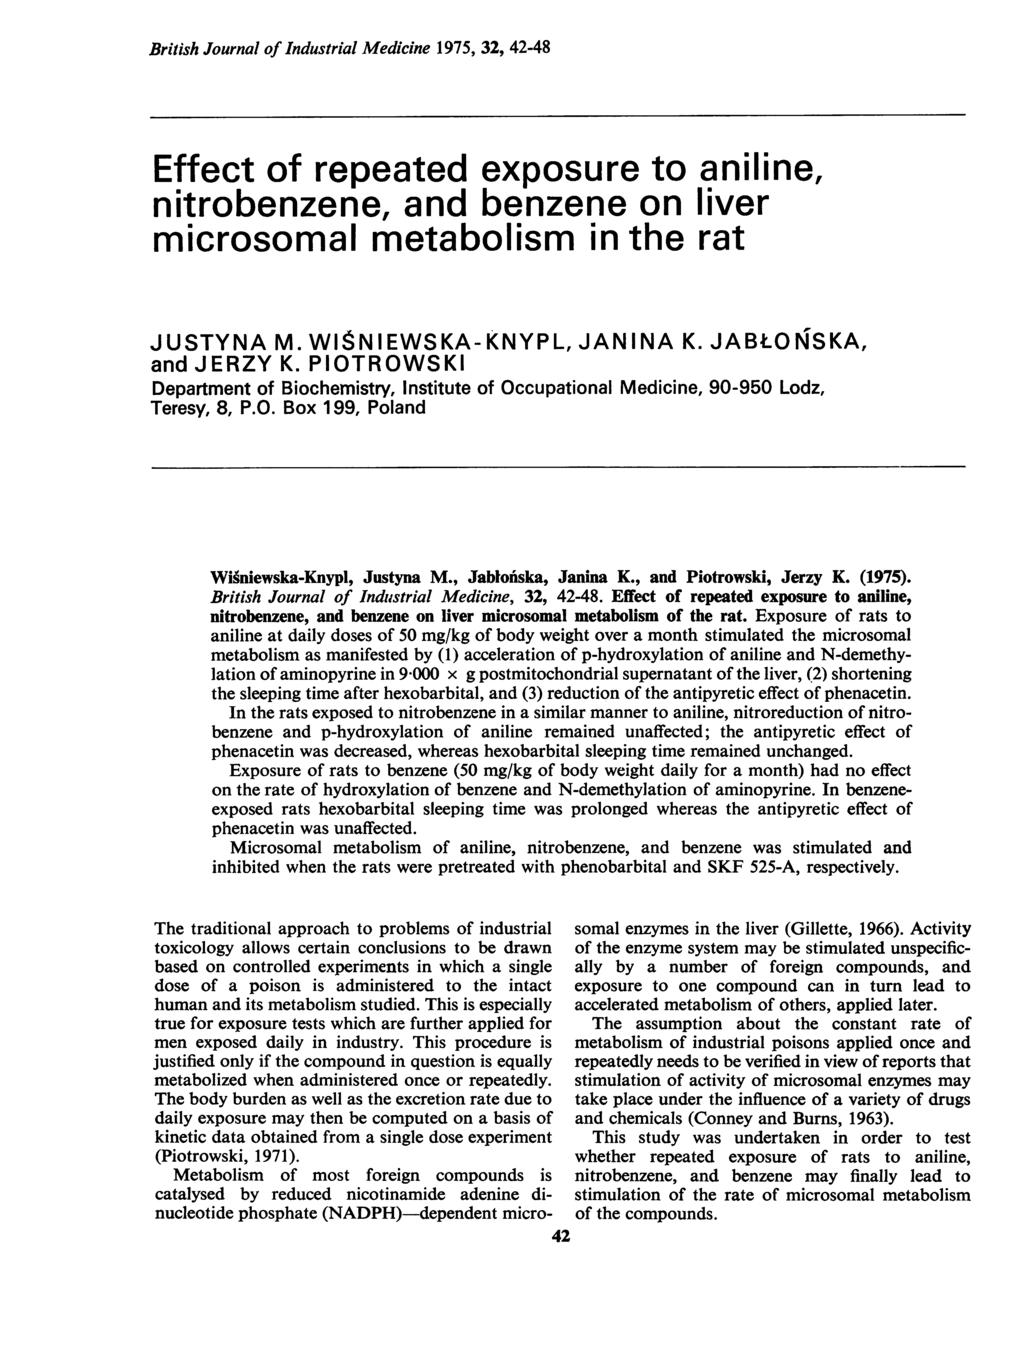 British Journal of Industrial Medicine 1975, 32, 42-48 Effect of repeated exposure to aniline, nitrobenzene, and benzene on liver microsomal metabolism in the rat JUSTYNA M.